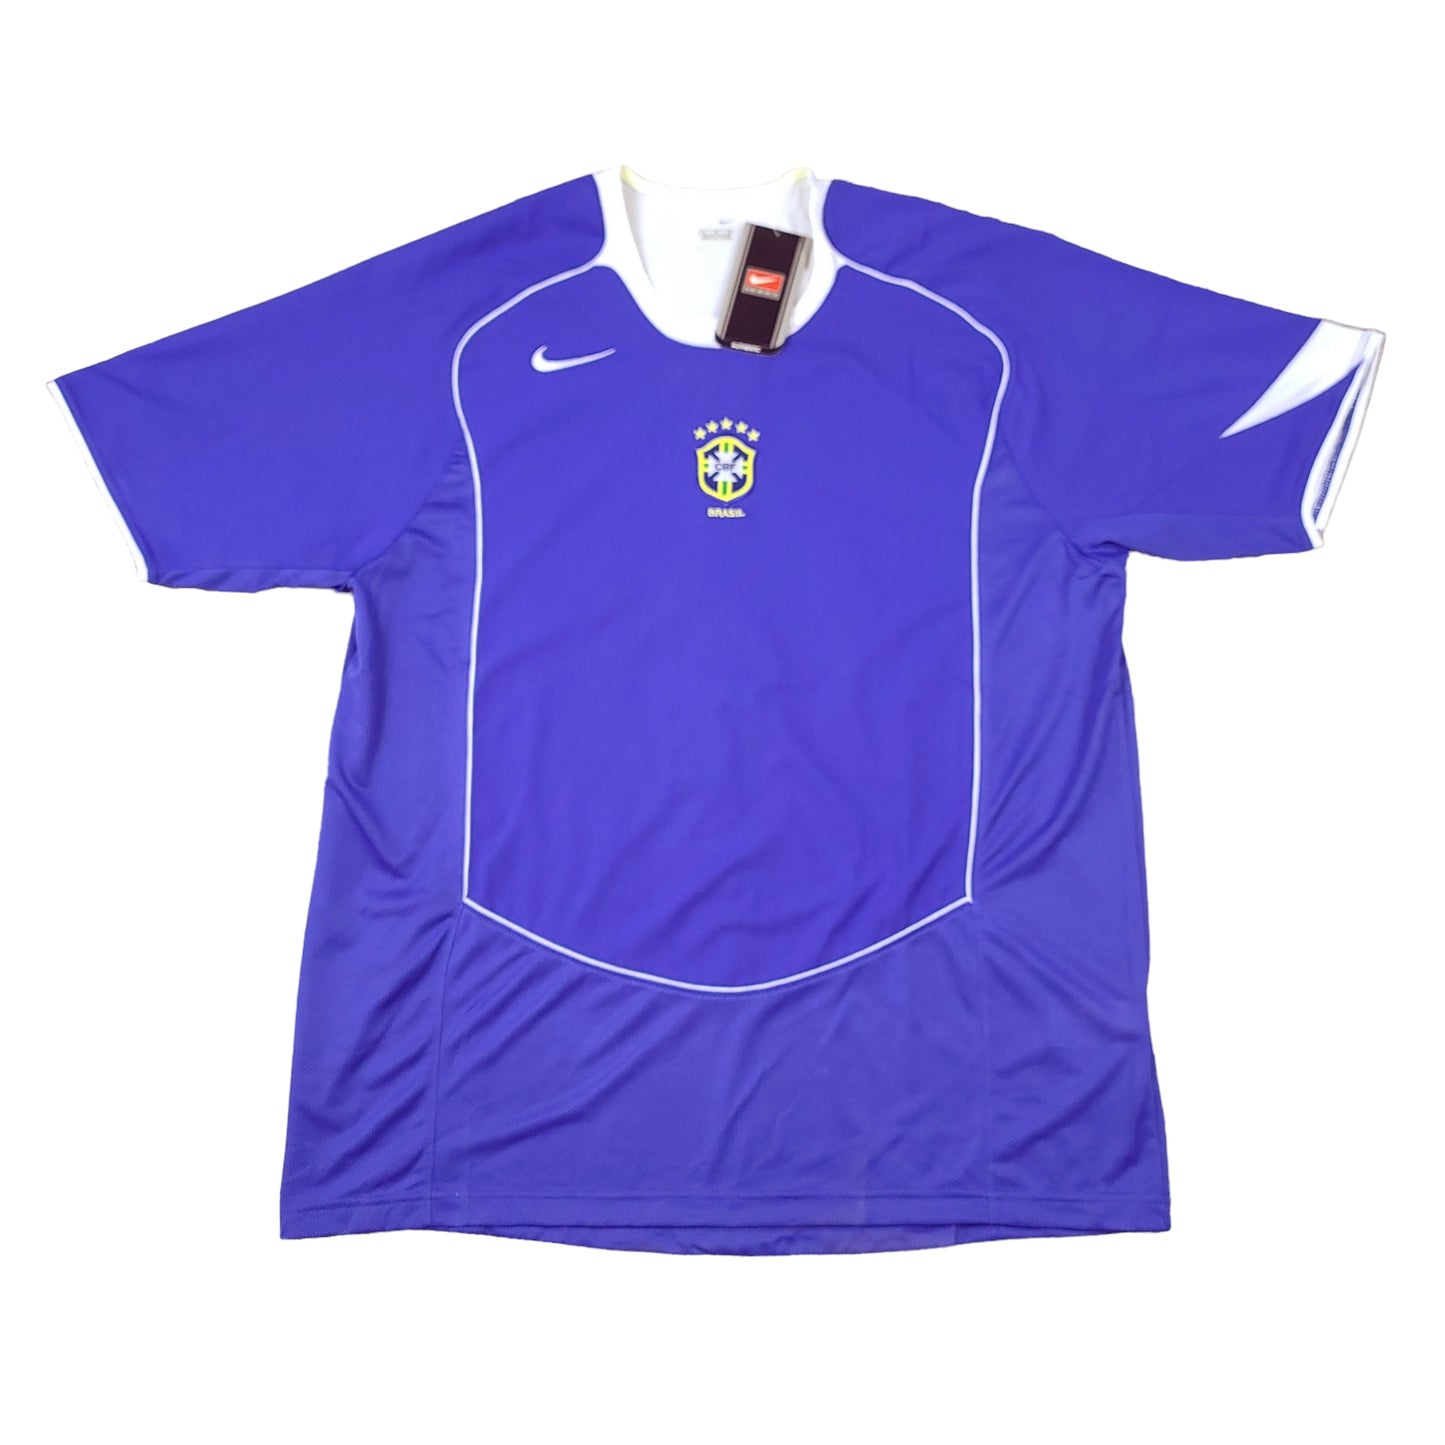 Vintage Deadstock Nike Brazil Blue 2004 Soccer Jersey (New with Tags)